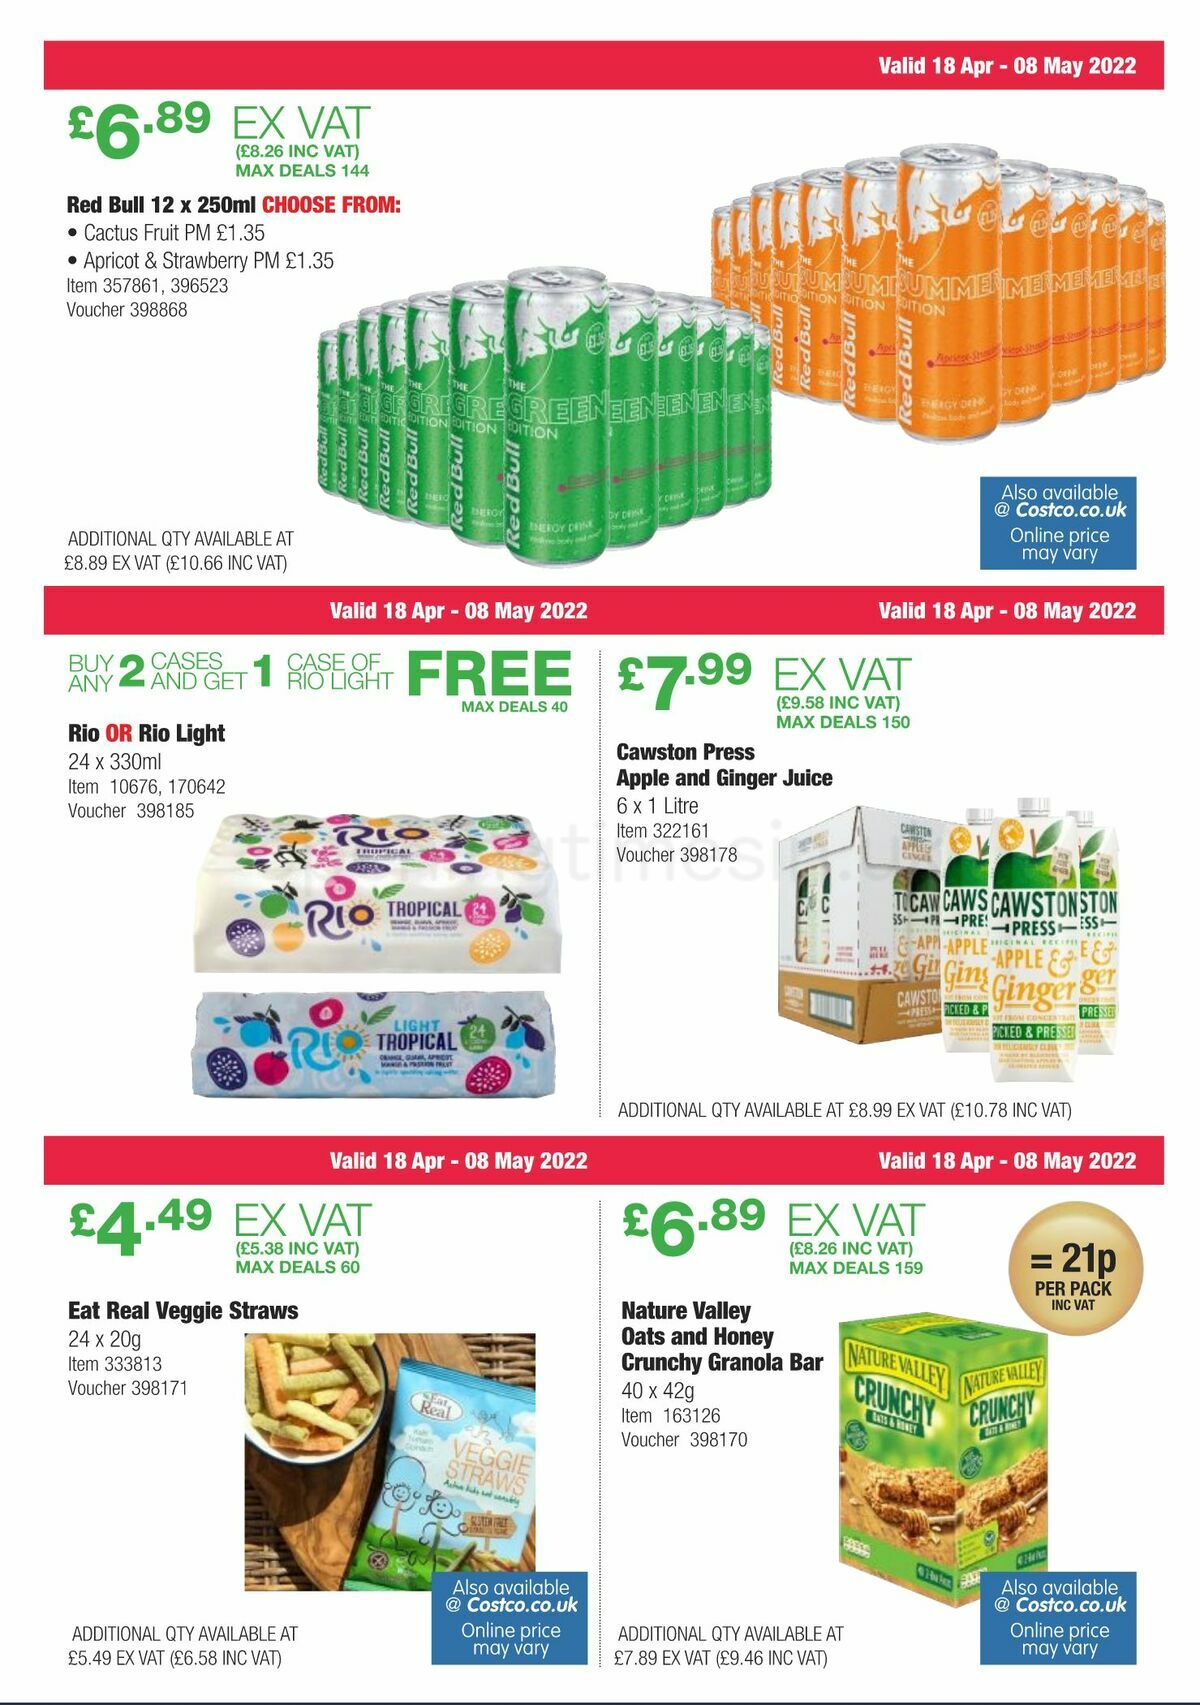 Costco Scotland & Wales Offers from 18 April